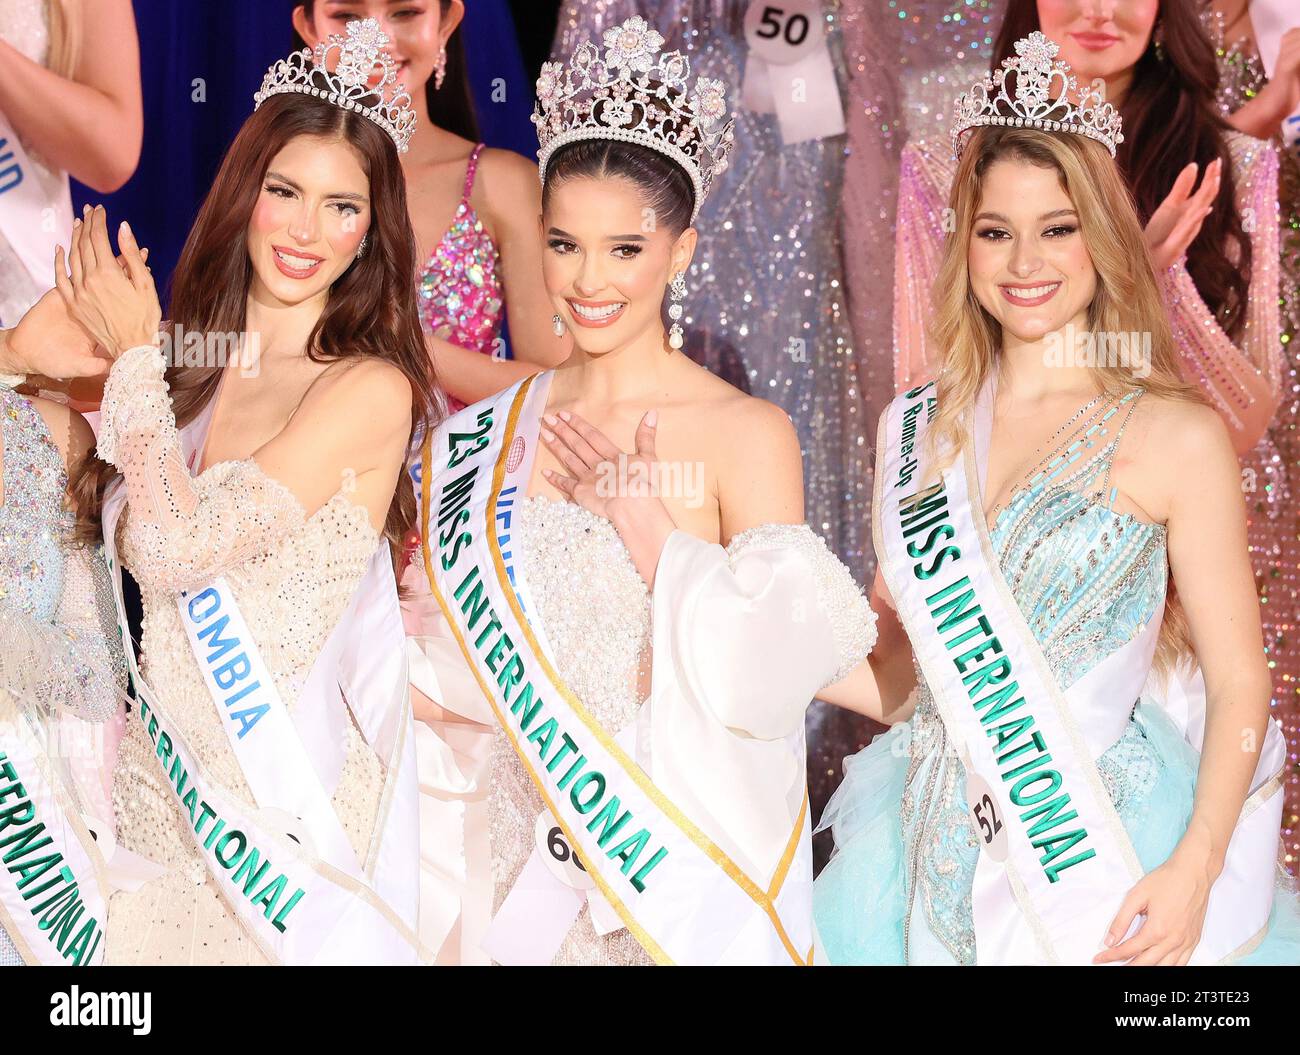 Tokyo, Japan. 26th Oct, 2023. Miss Venezuela Andrea Rubio (C) is crowned as the Miss International 2023 while Miss Colombia Sofia Osio Luna (L) of runner-up and Miss Peru Camilia Diaz Daneri (R) of 2nd runner-up smile at the 61st Miss International beauty pageant in Tokyo on Thursday, October 26, 2023. 70 contestants participaed the annual beauty contests. (photo by Yoshio Tsunoda/AFLO) Stock Photo